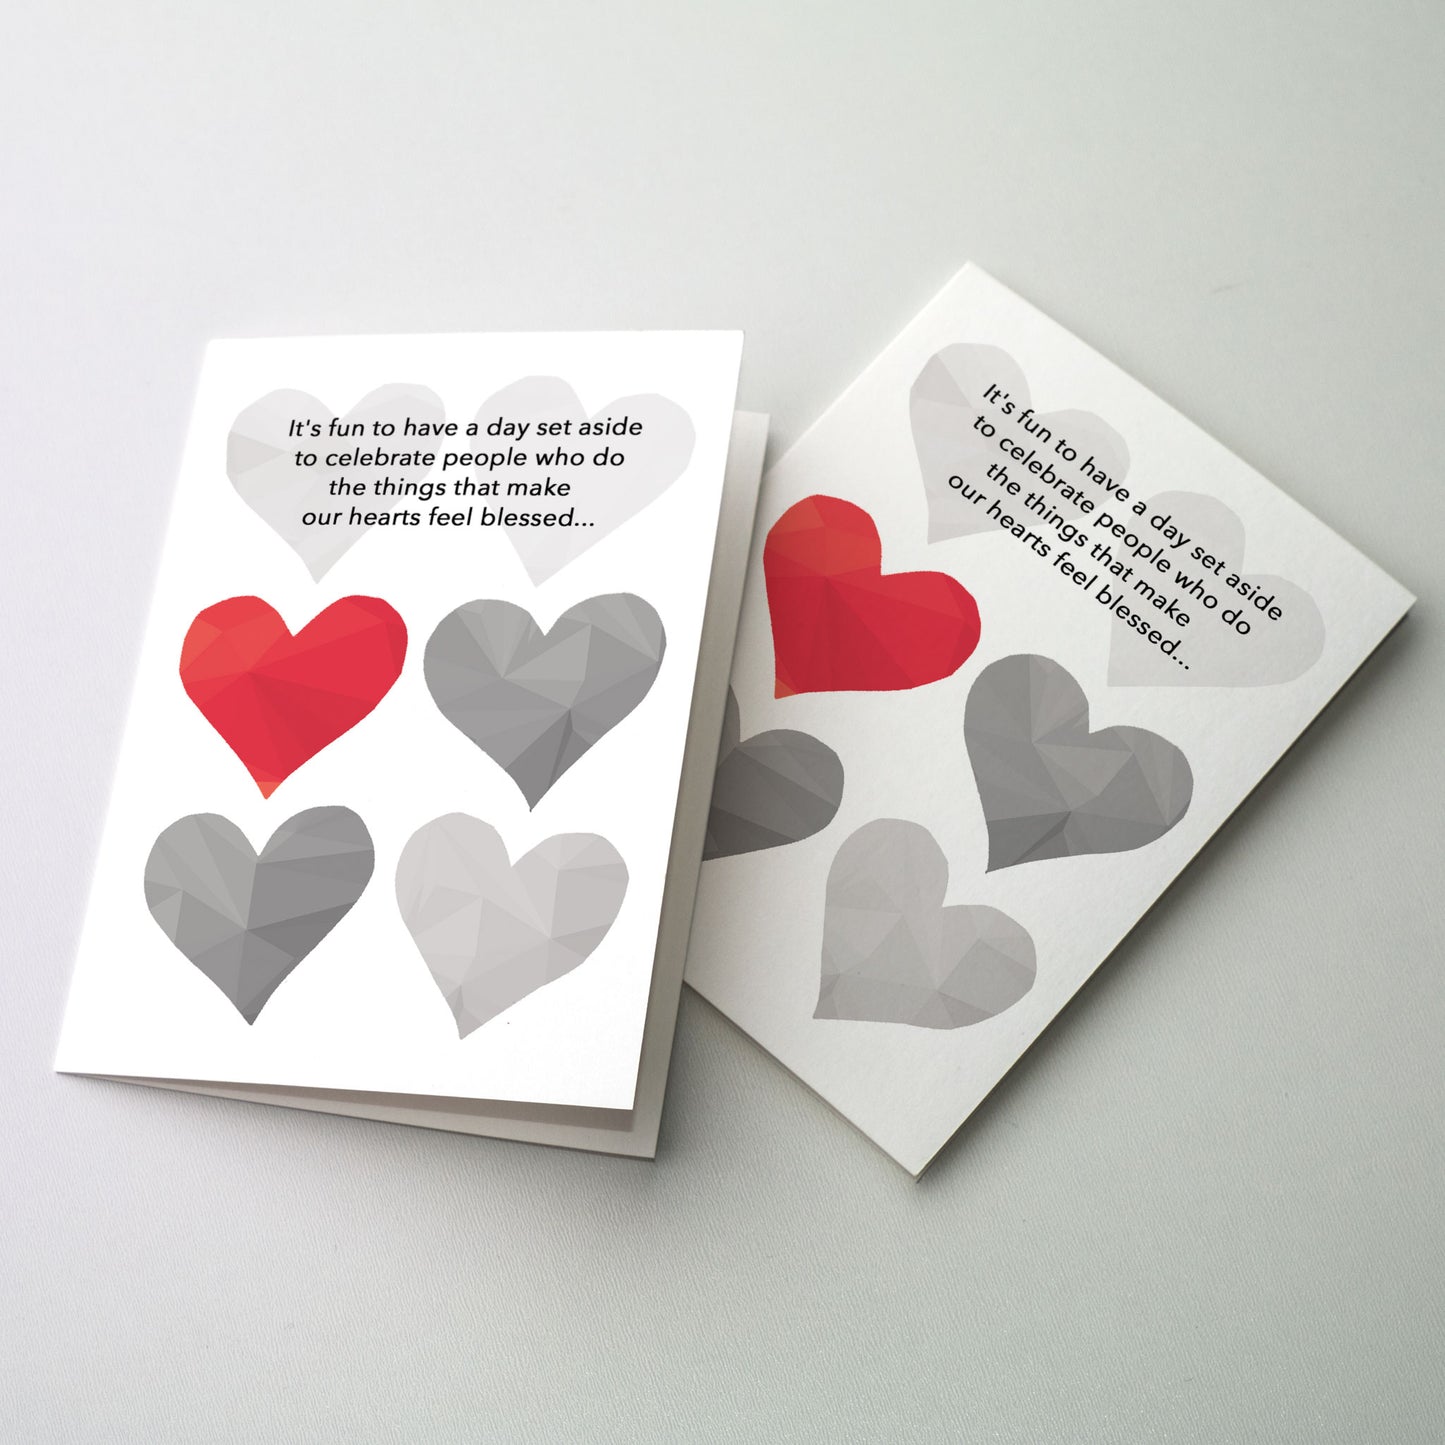 It's Fun to Have a Day - St. Valentine's Day Card